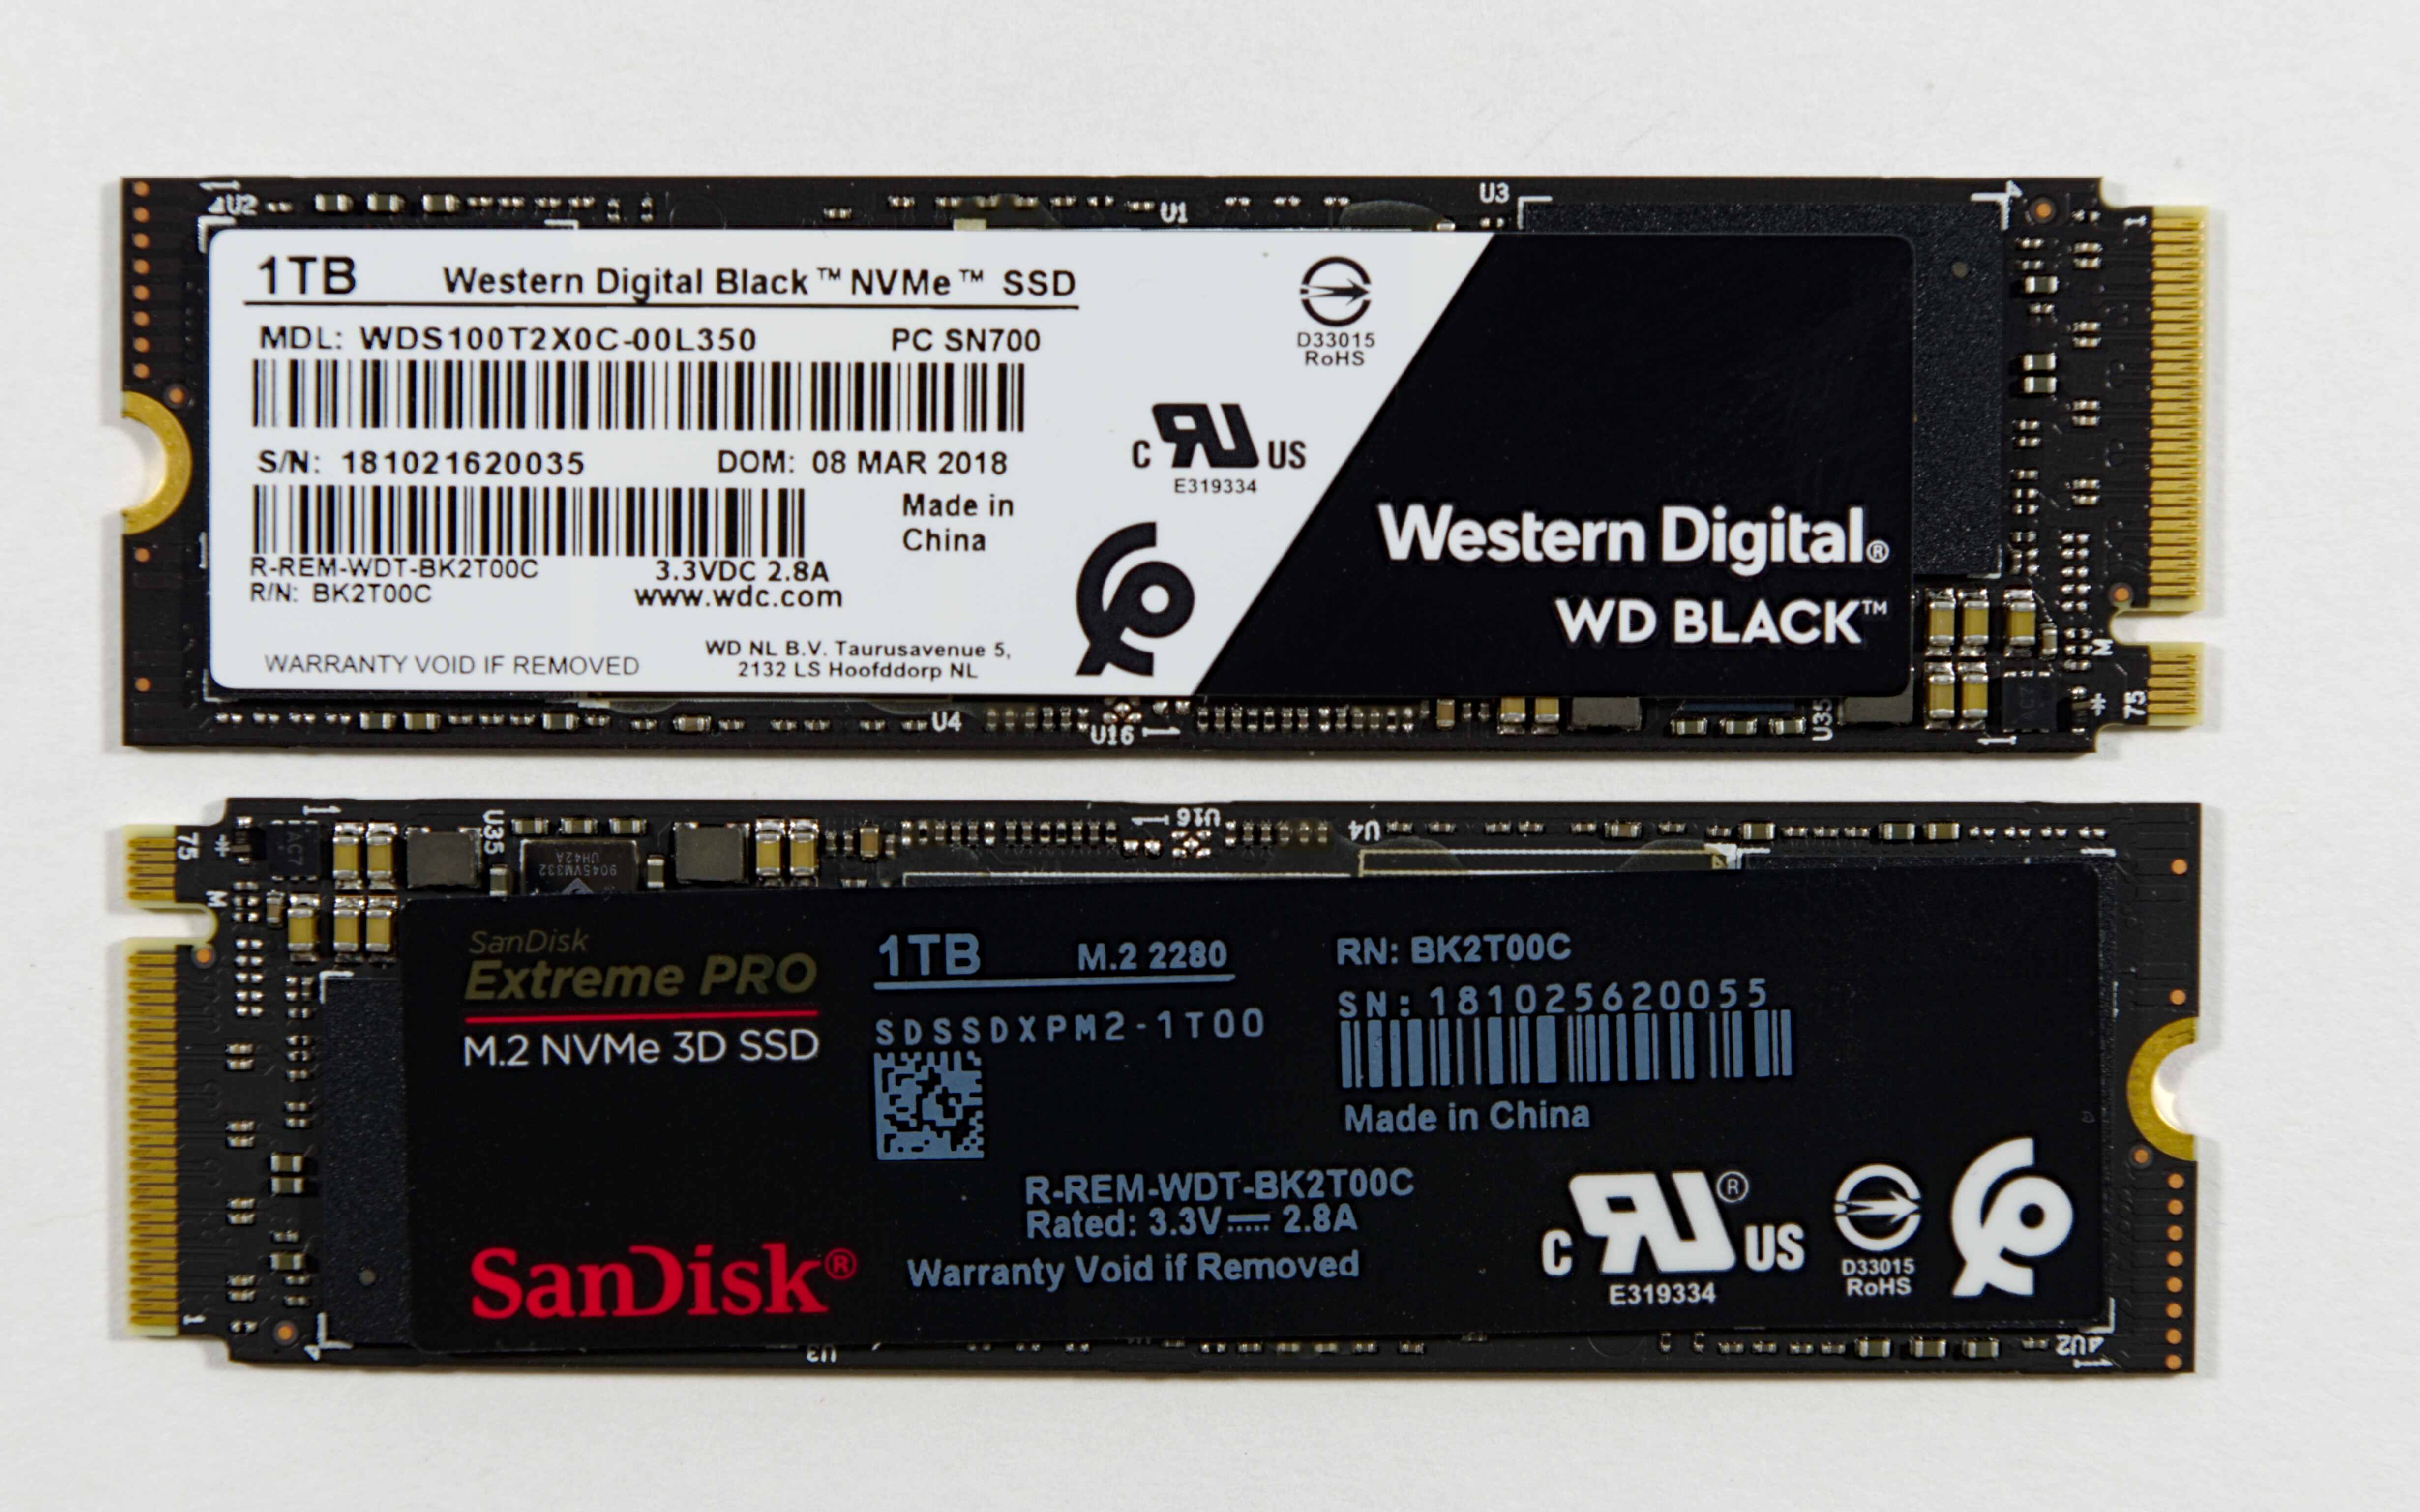 Conclusion - The Western Digital WD Black 3D NAND SSD Review: EVO